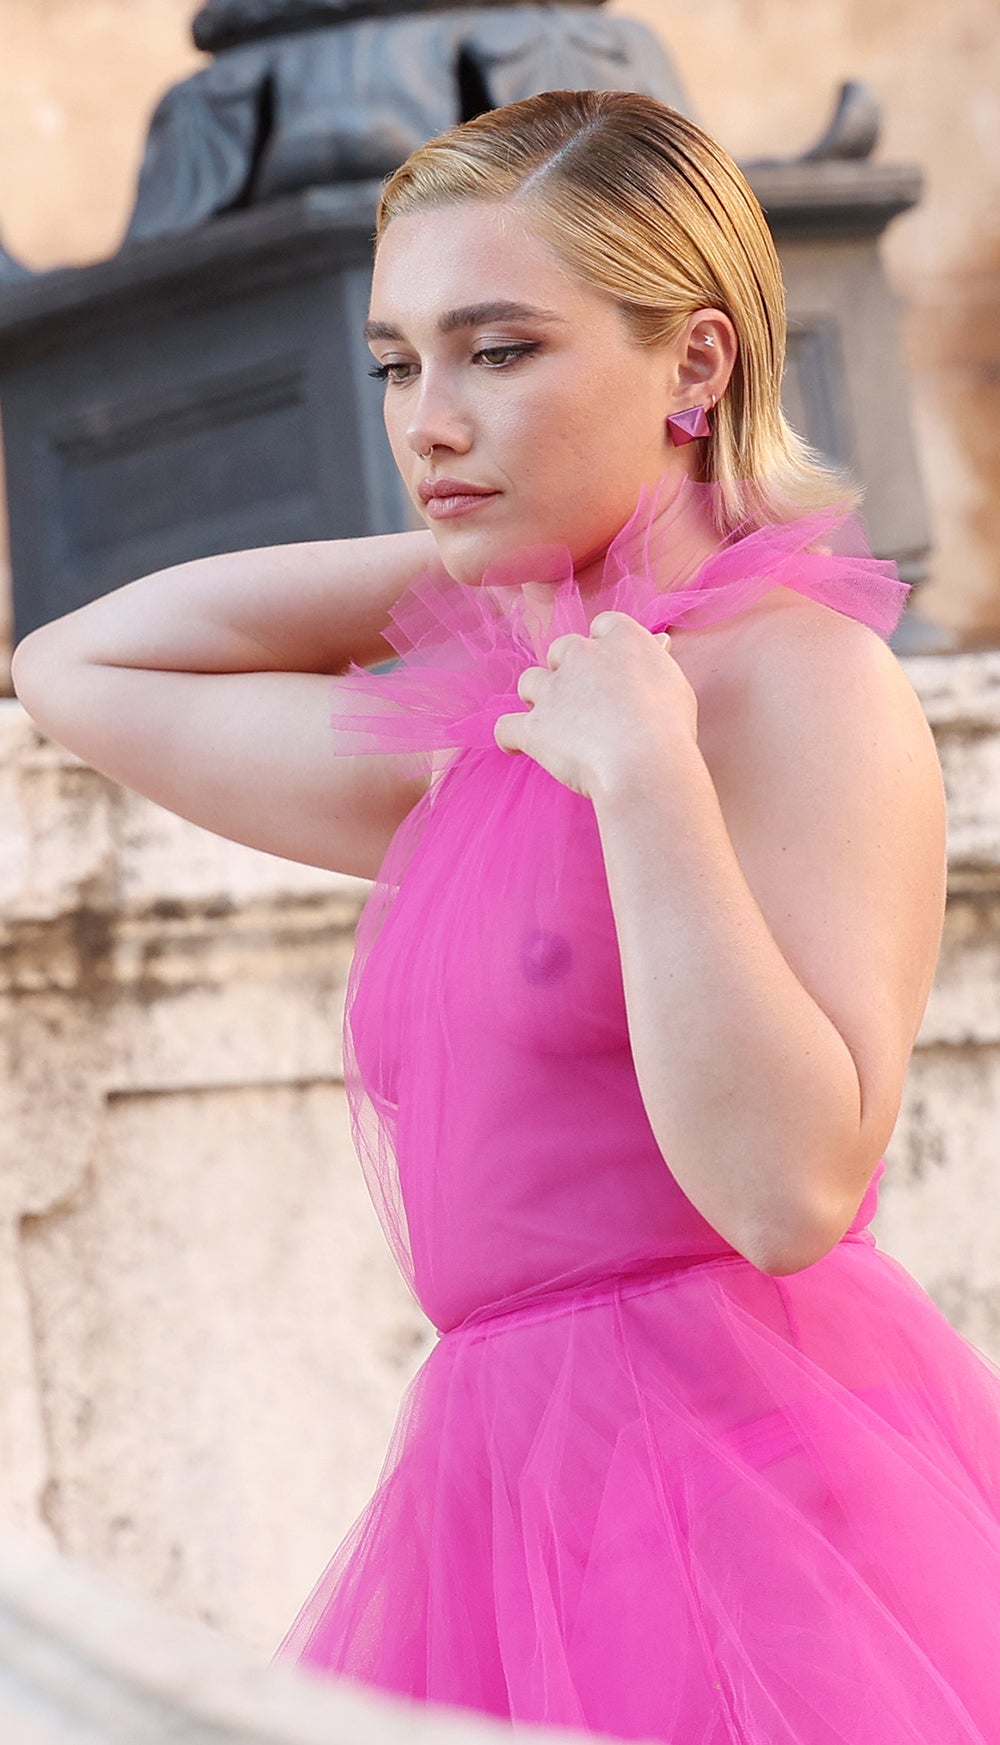 Florence Pugh in her sheer gown by Pierpaolo Piccioli